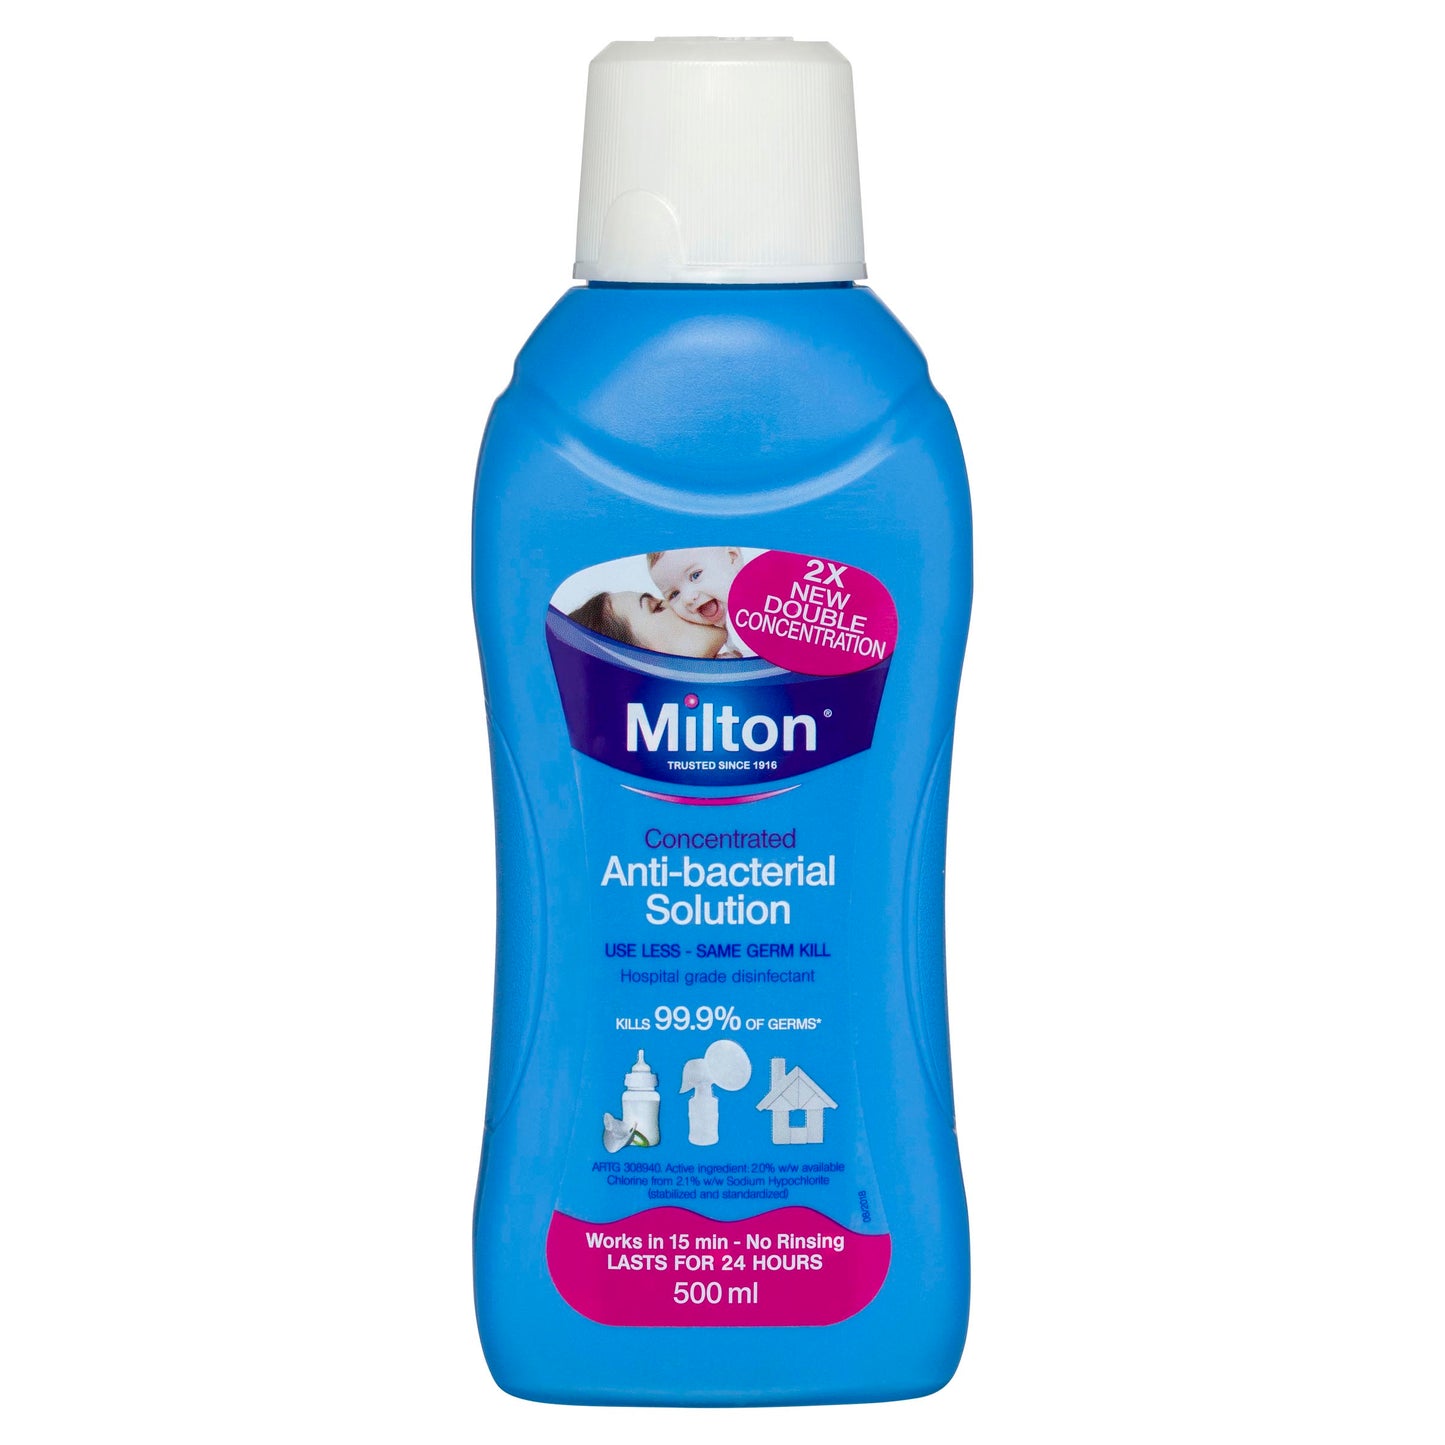 Milton Antibacterial Solution 500ml Double Concentration